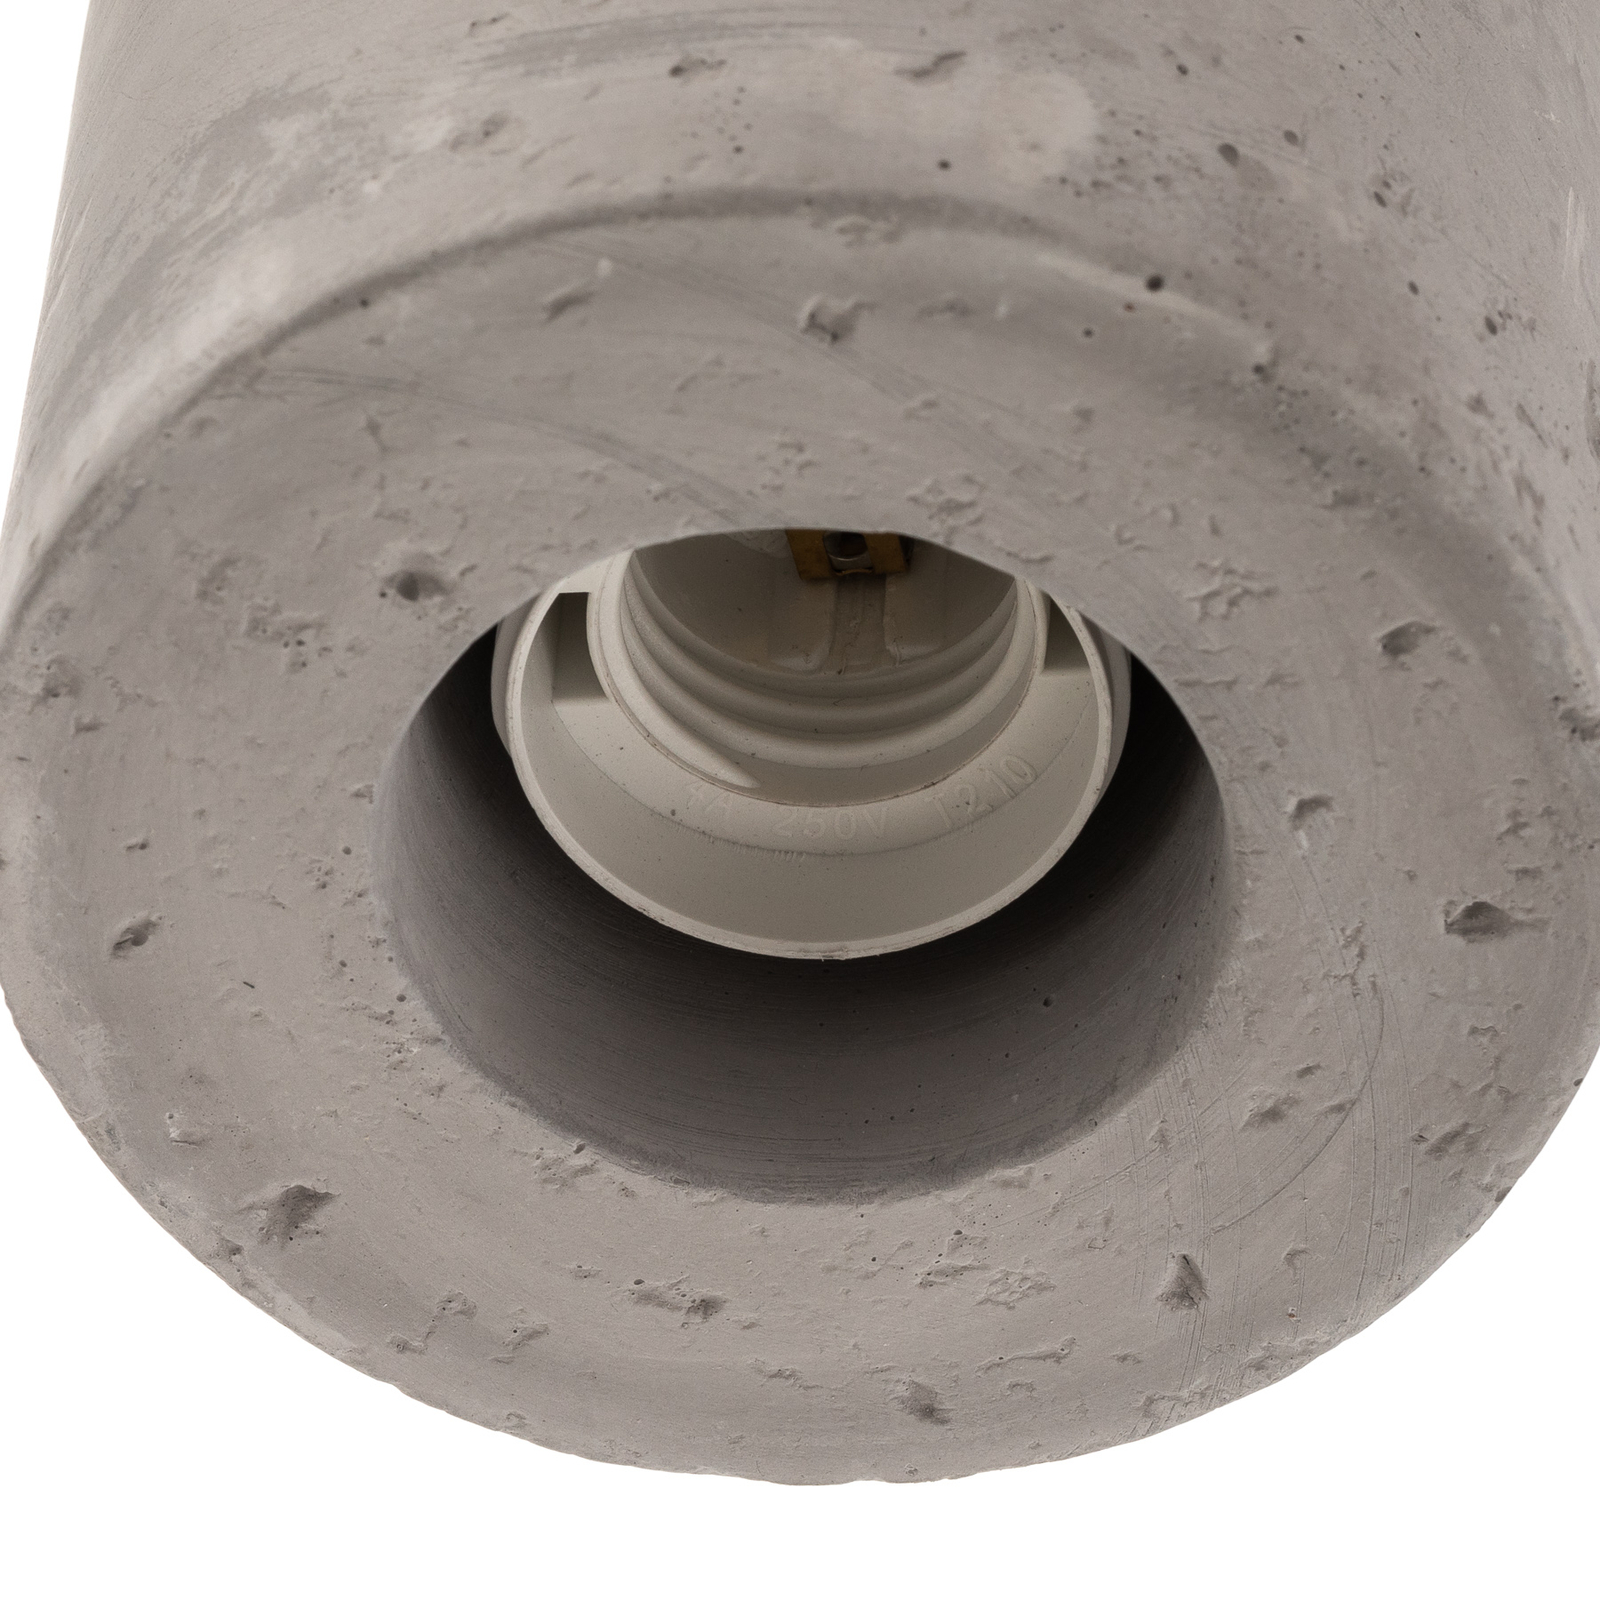 Akira ceiling light made of concrete, cylindrical